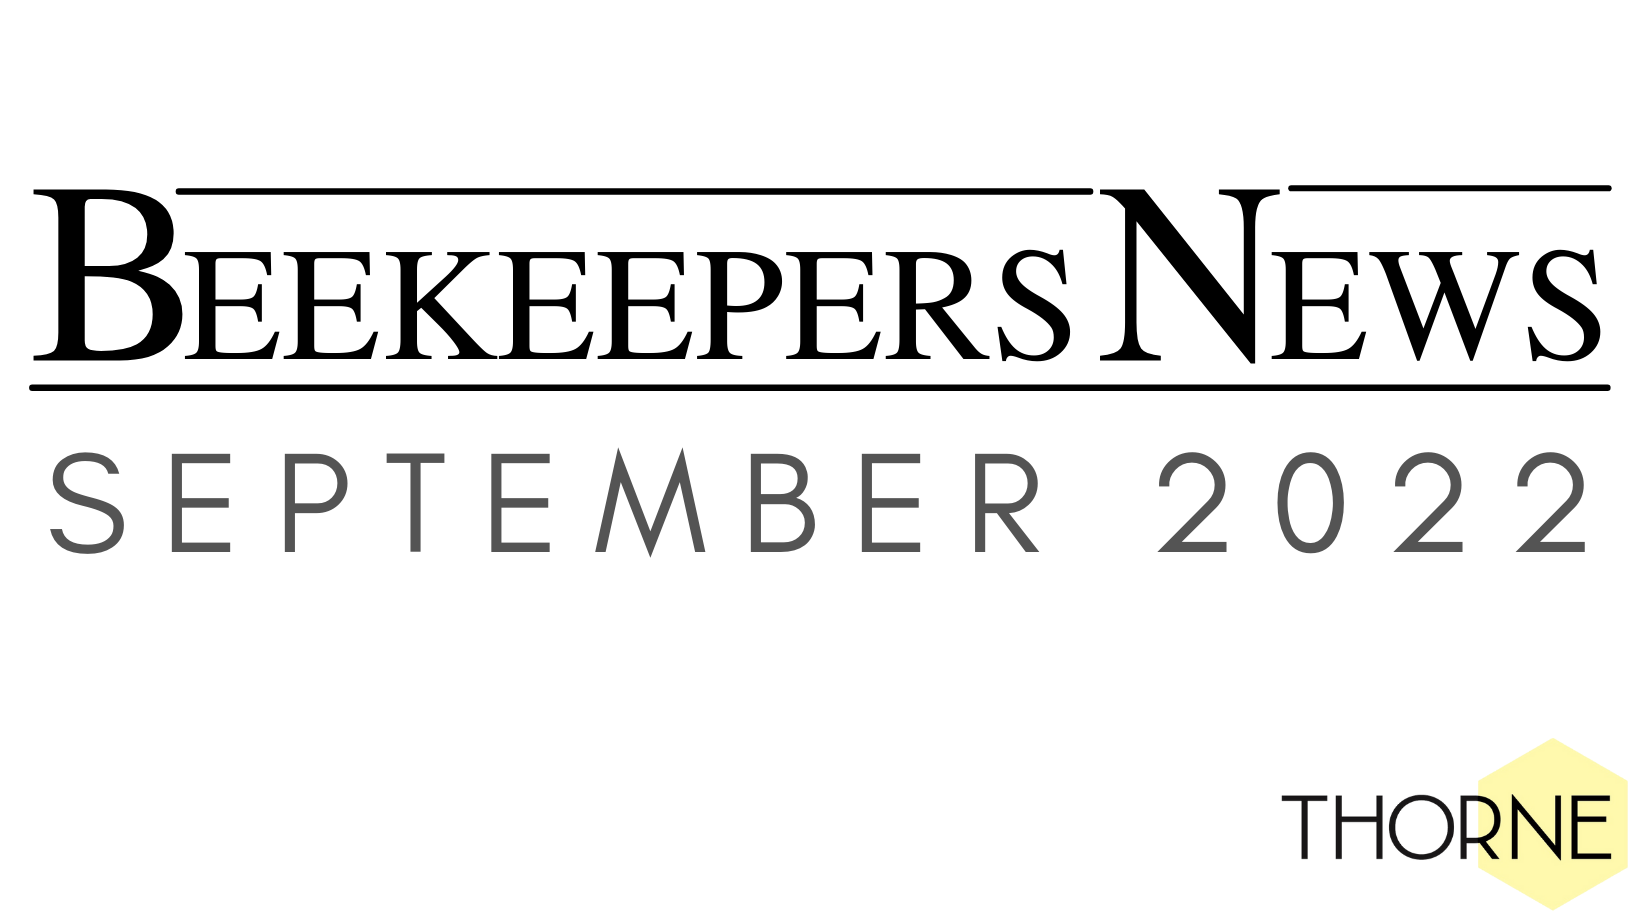 Beekeepers News - September - Issue 72